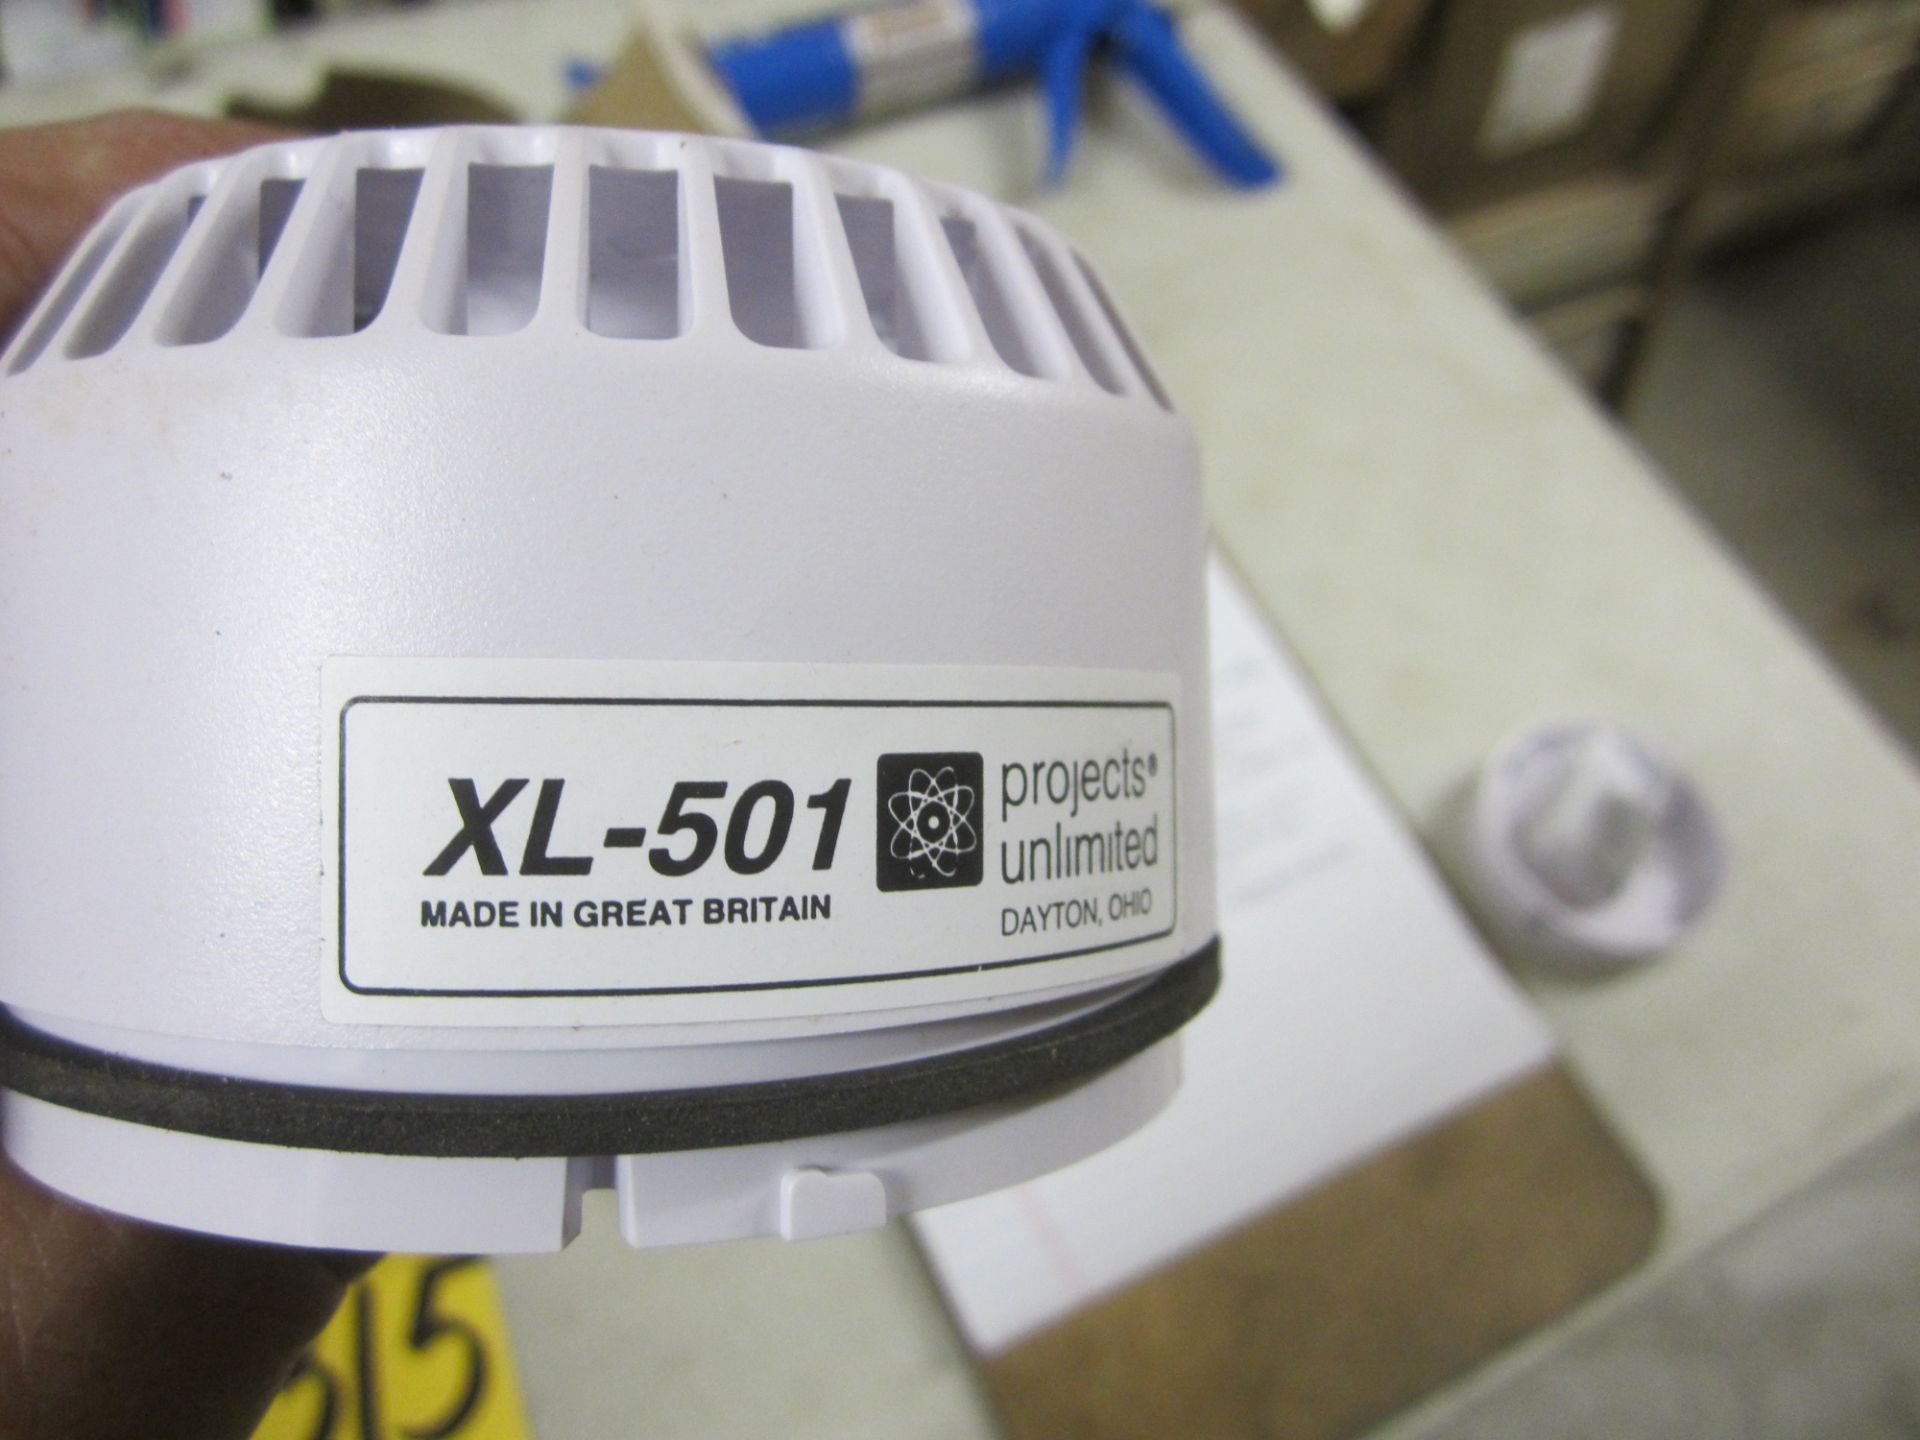 (5) Projects Unlimited LX501 Buzzer Alarms and (44) Projects Unlimited XL601 Buzzer Alarms - Image 3 of 3